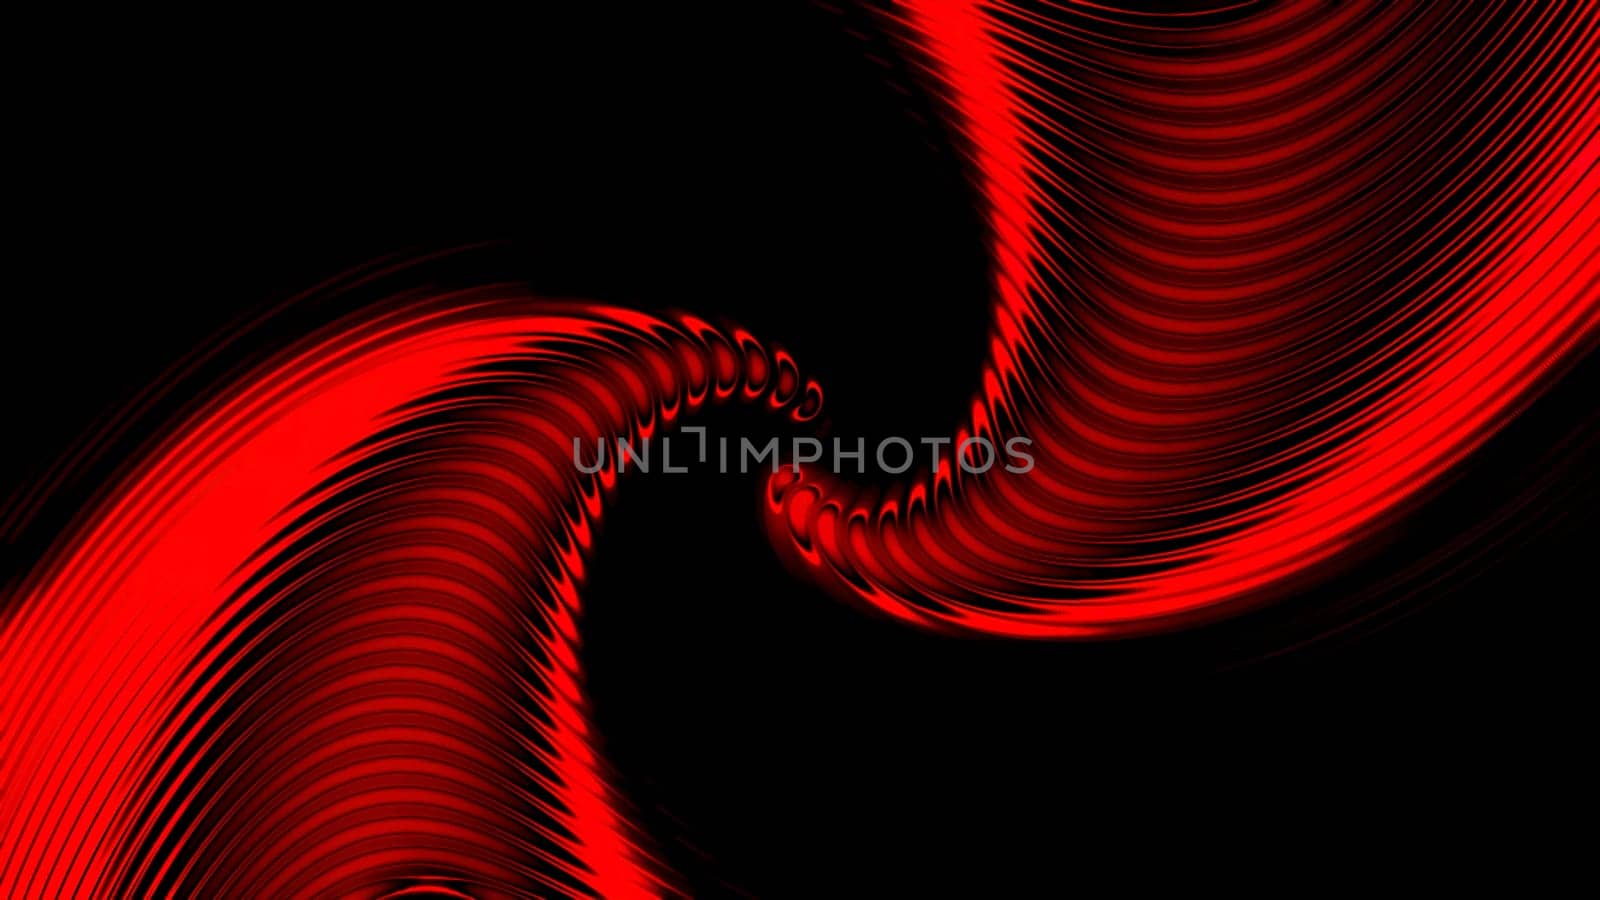 Abstract spiral flow with stripes on black background. Motion. Spiral flow with moving stripes. Swirling 3d stream in motion on black background.